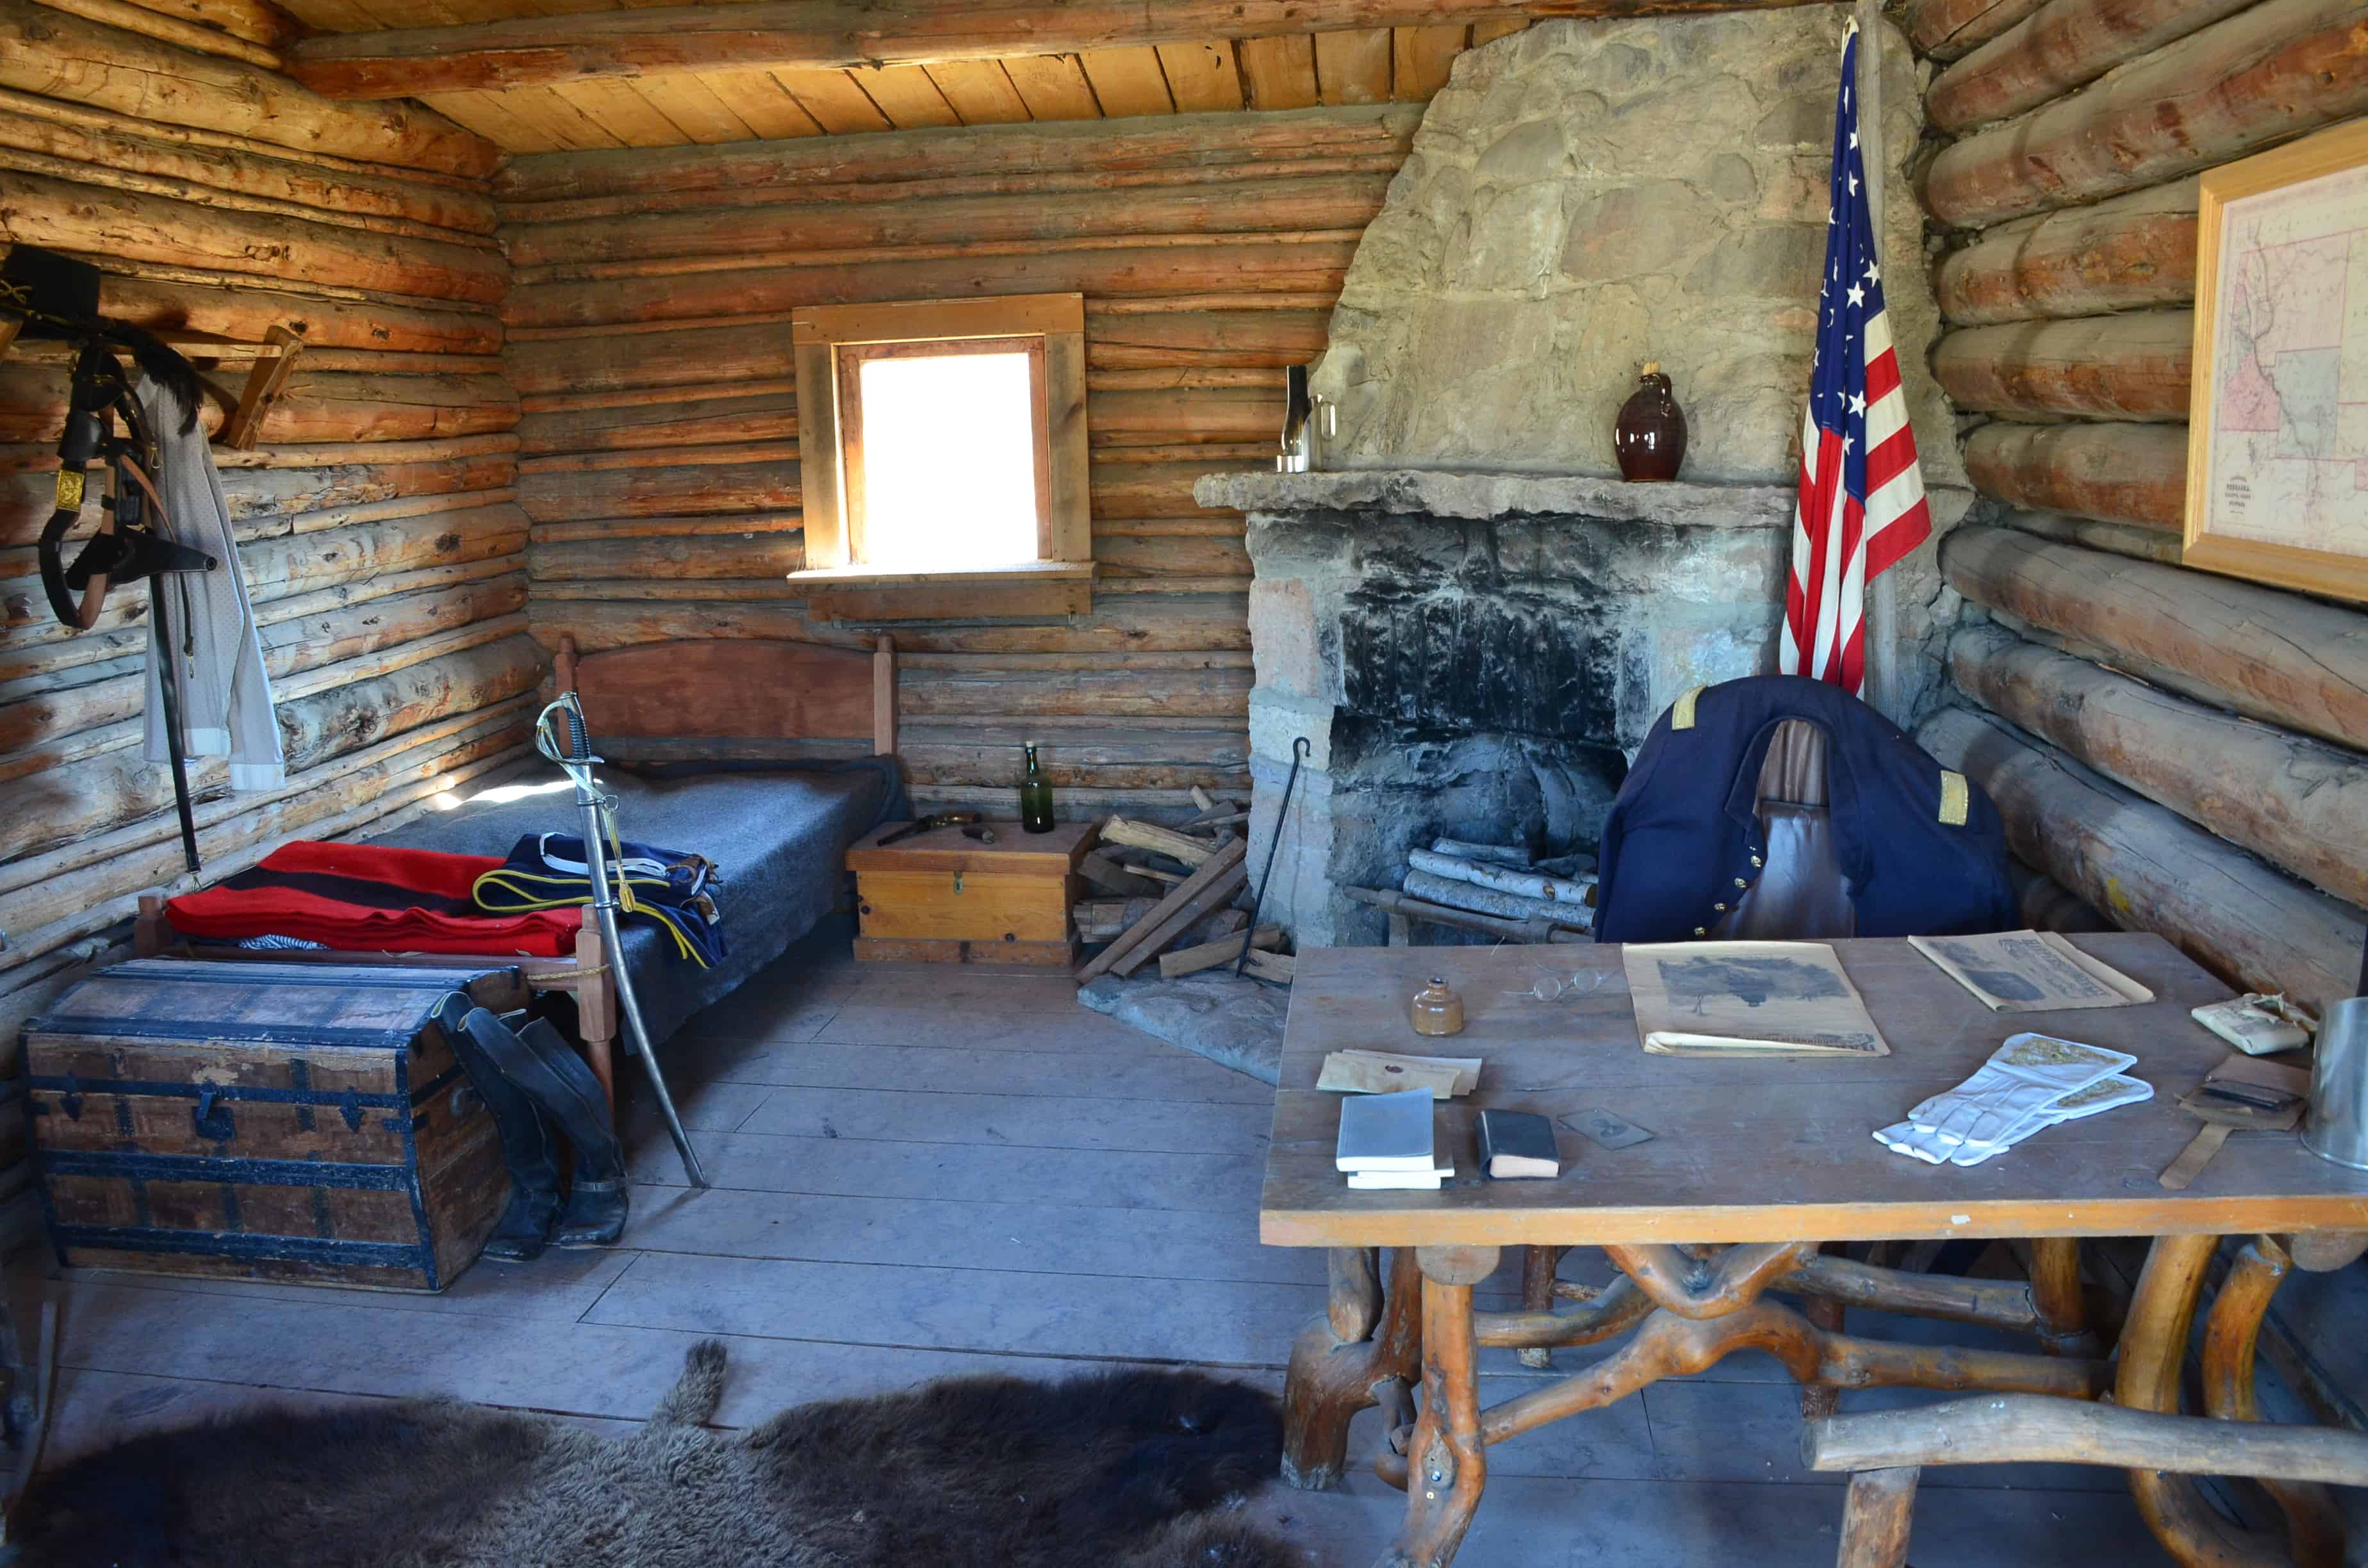 Officers' quarters at the replica of Fort Caspar